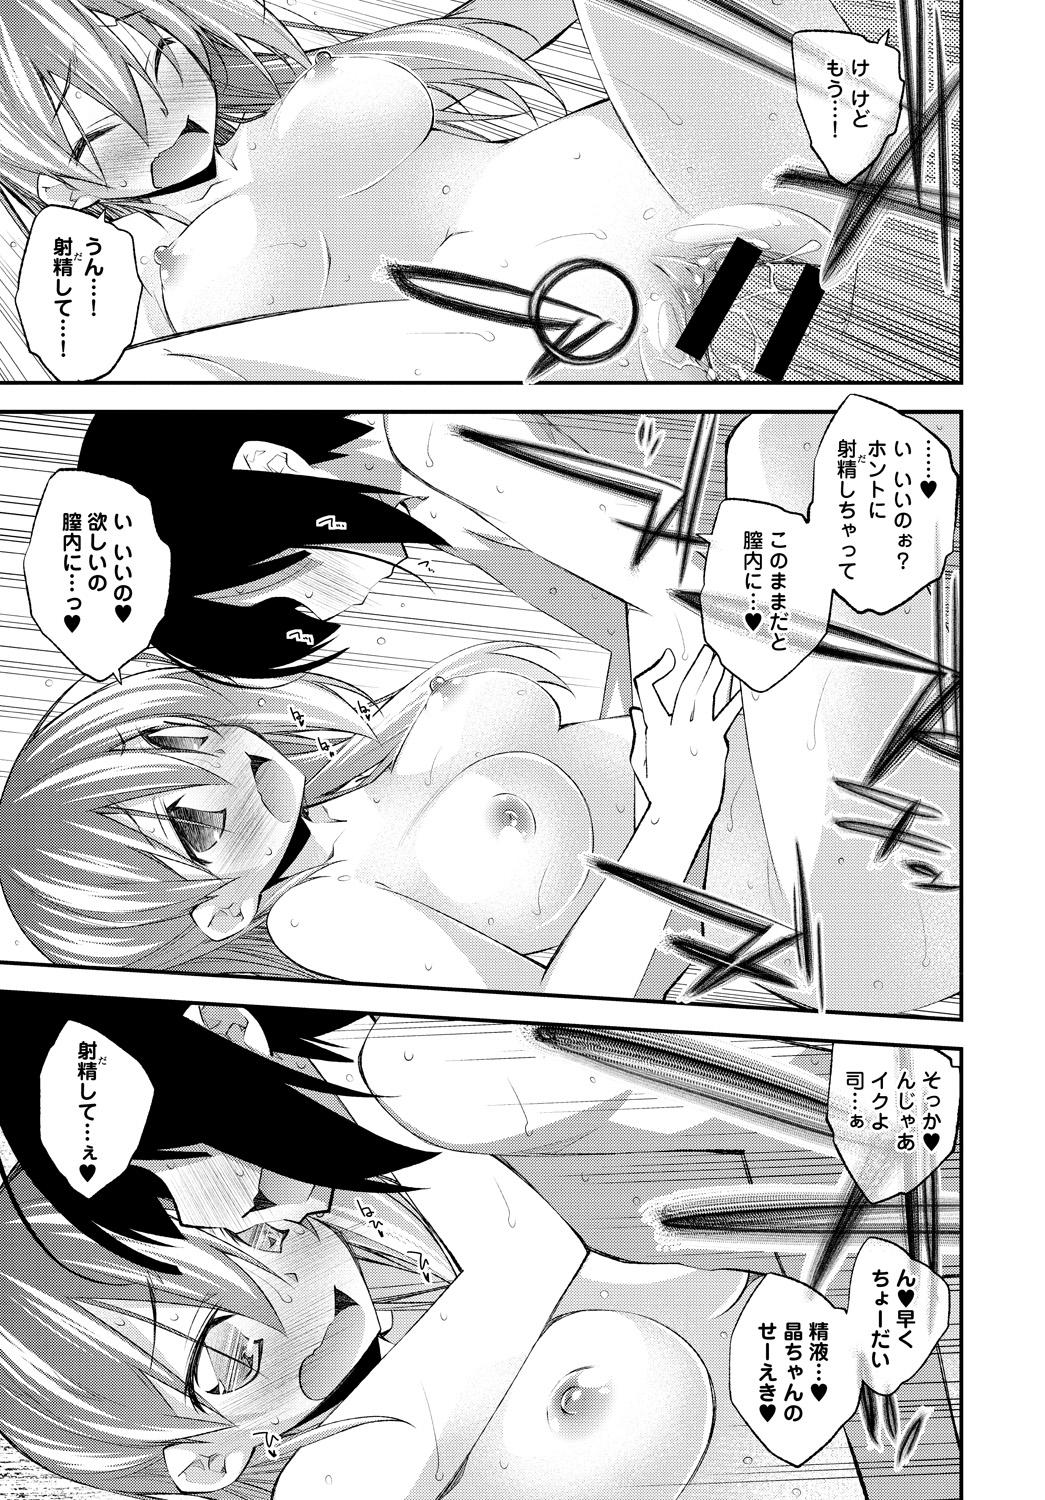 Safada Sexual Share From - Page 21